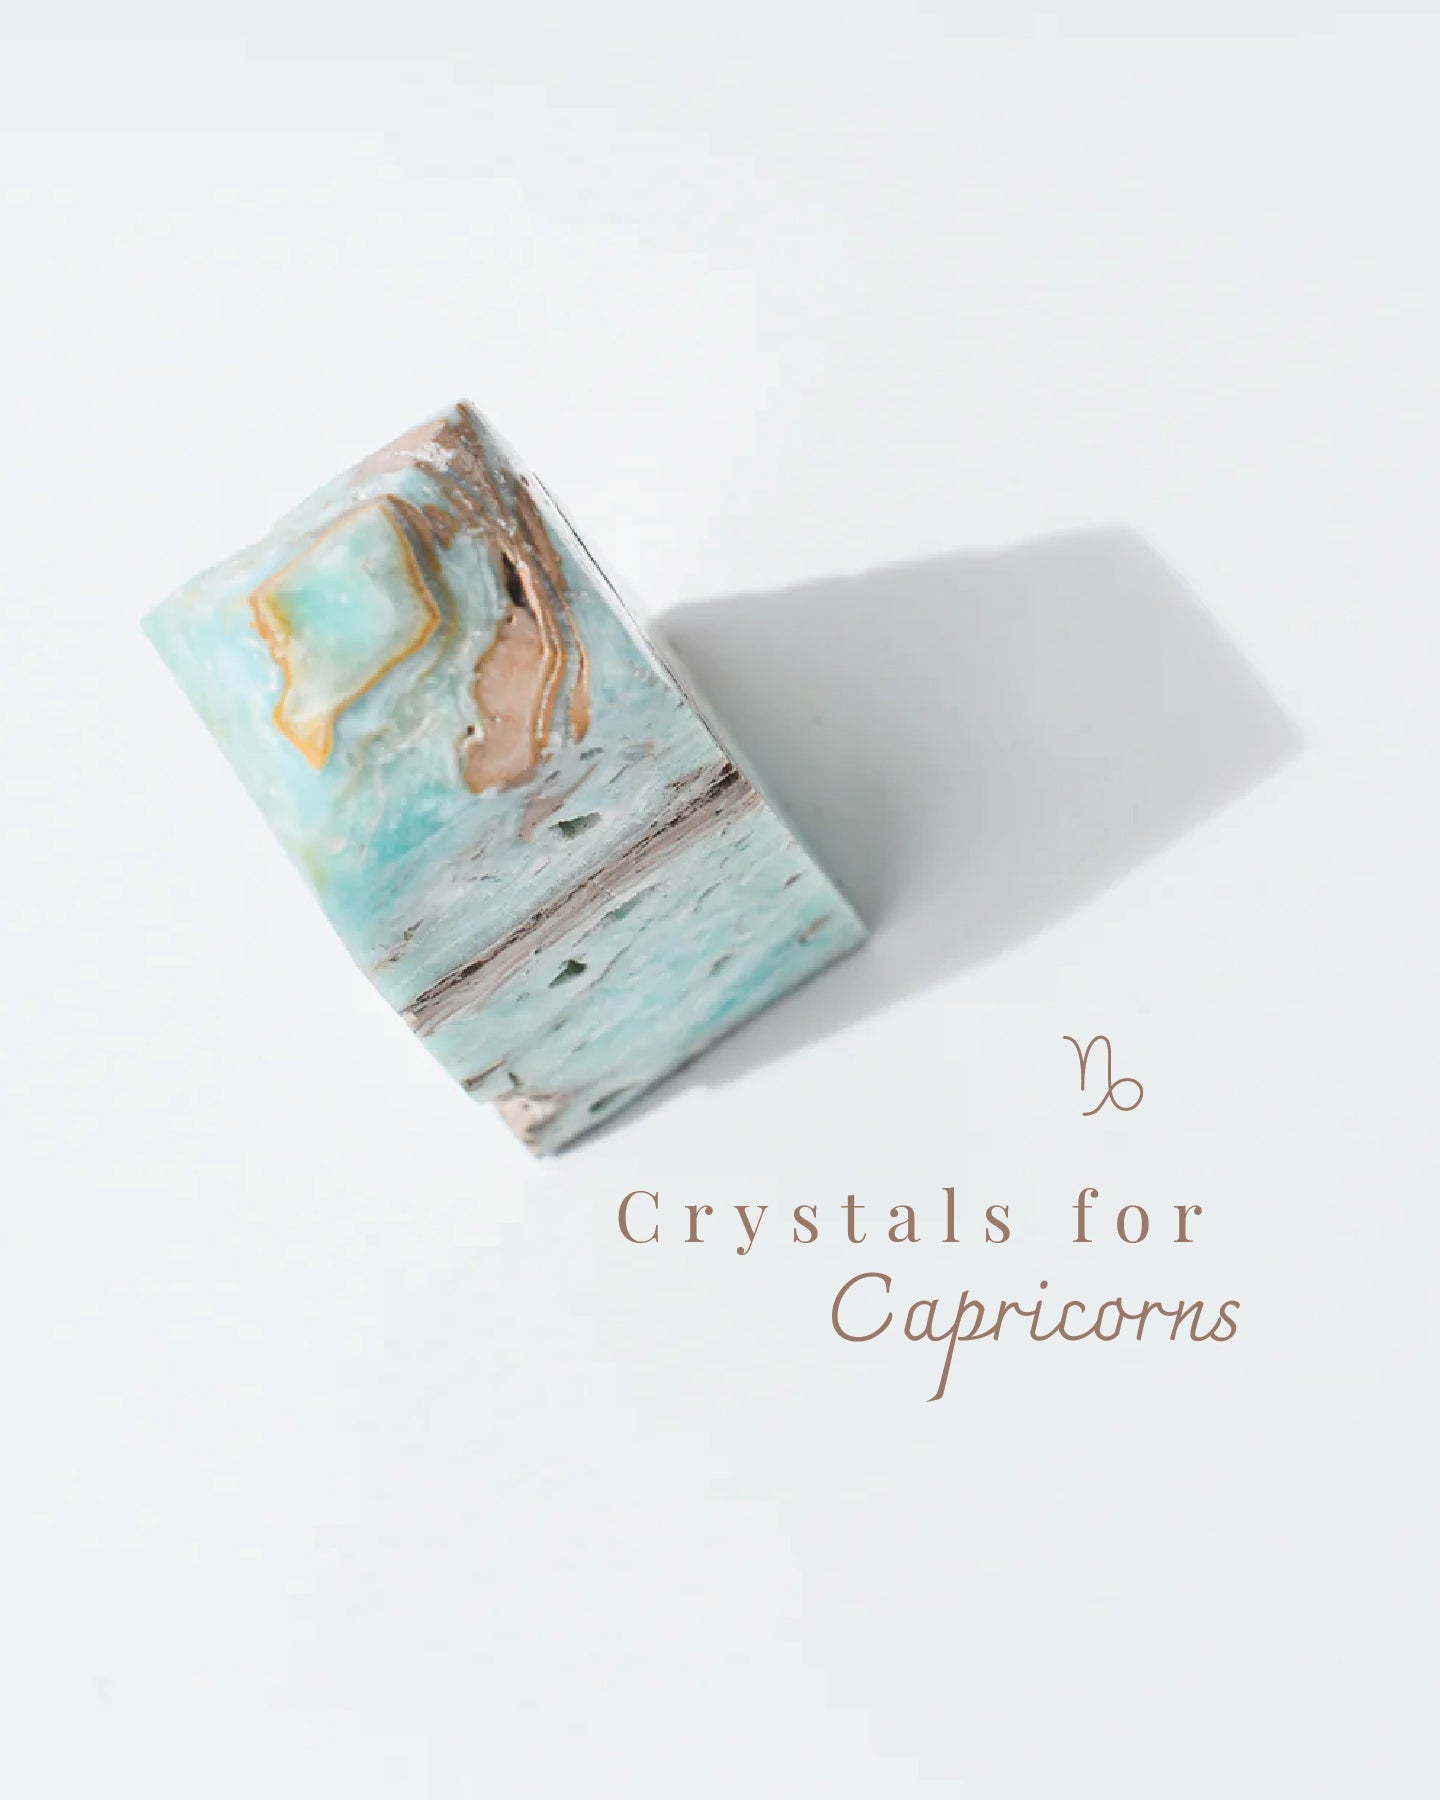 Crystals for Capricorns, Pessimism and the Overworked.